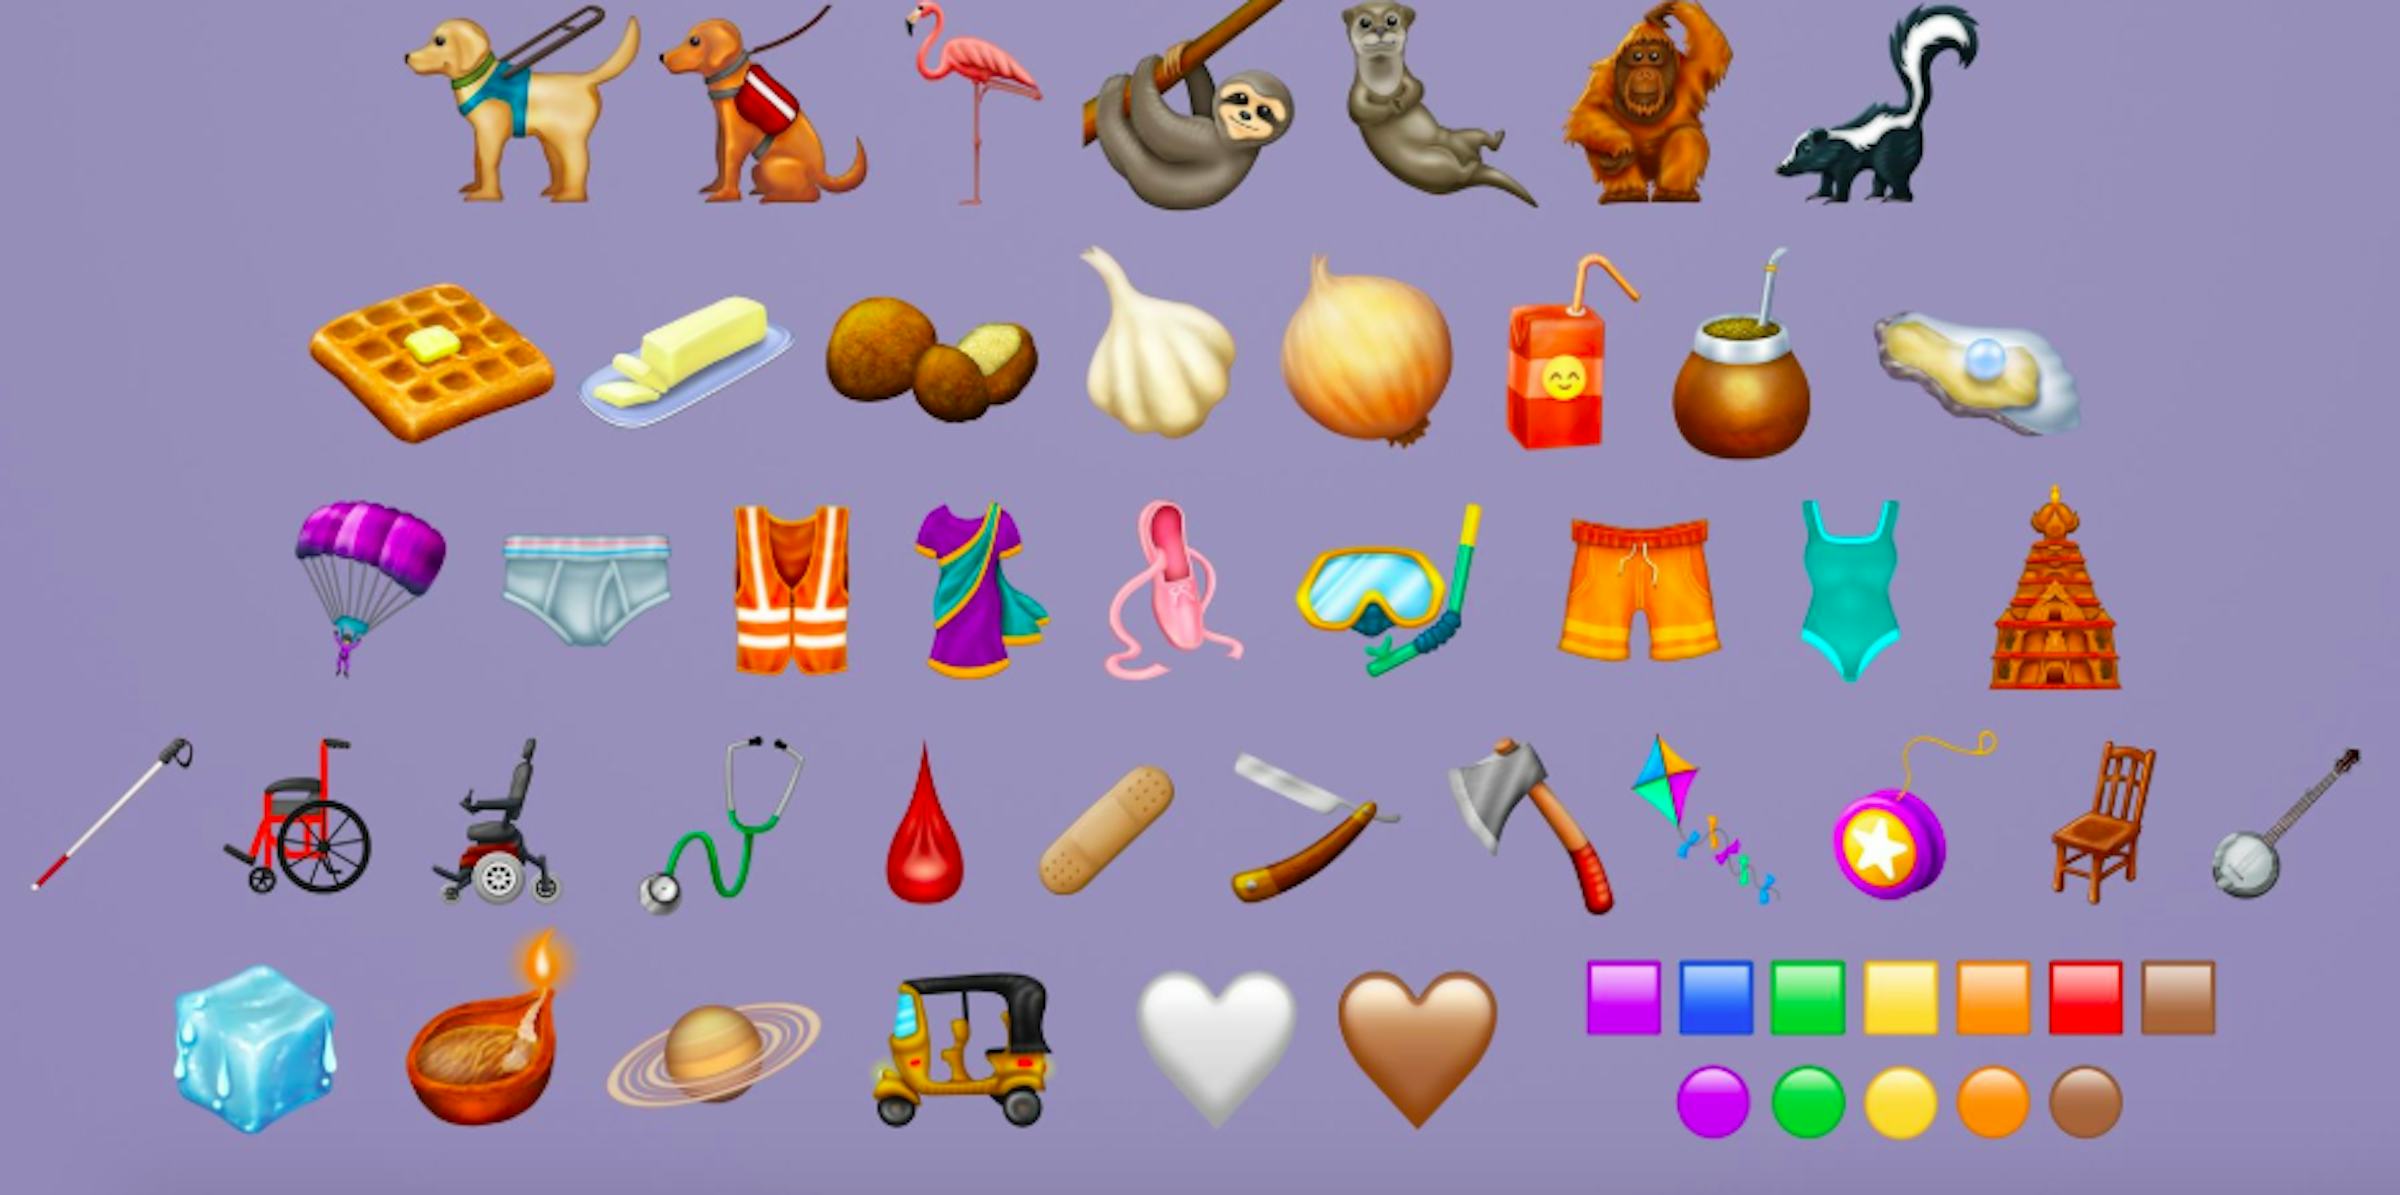 Apple's New Software Update Includes A Small Dick Emoji